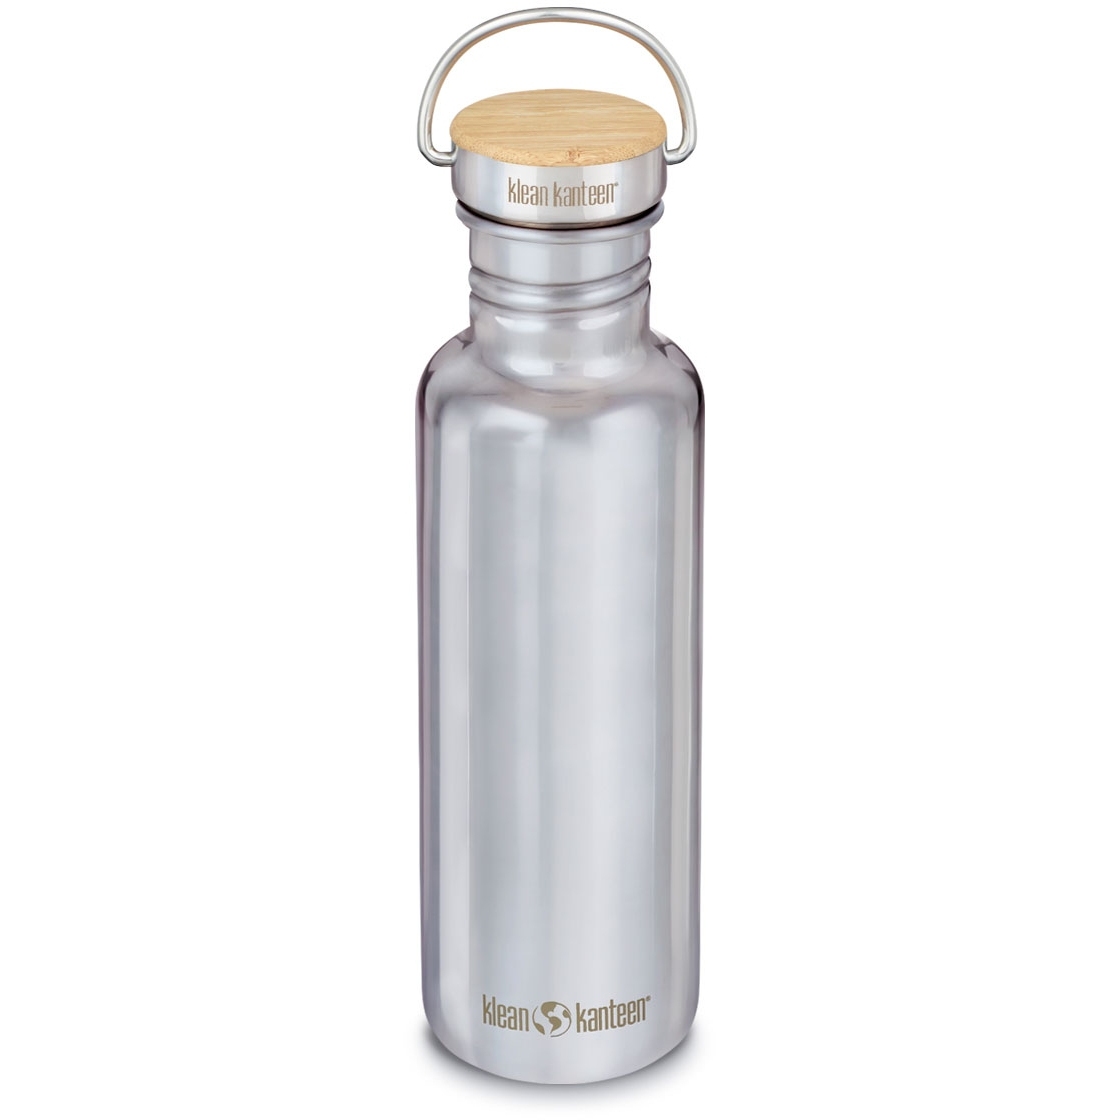 Picture of Klean Kanteen Reflect Bottle with Bamboo Cap 532 ml - Mirrored Stainless